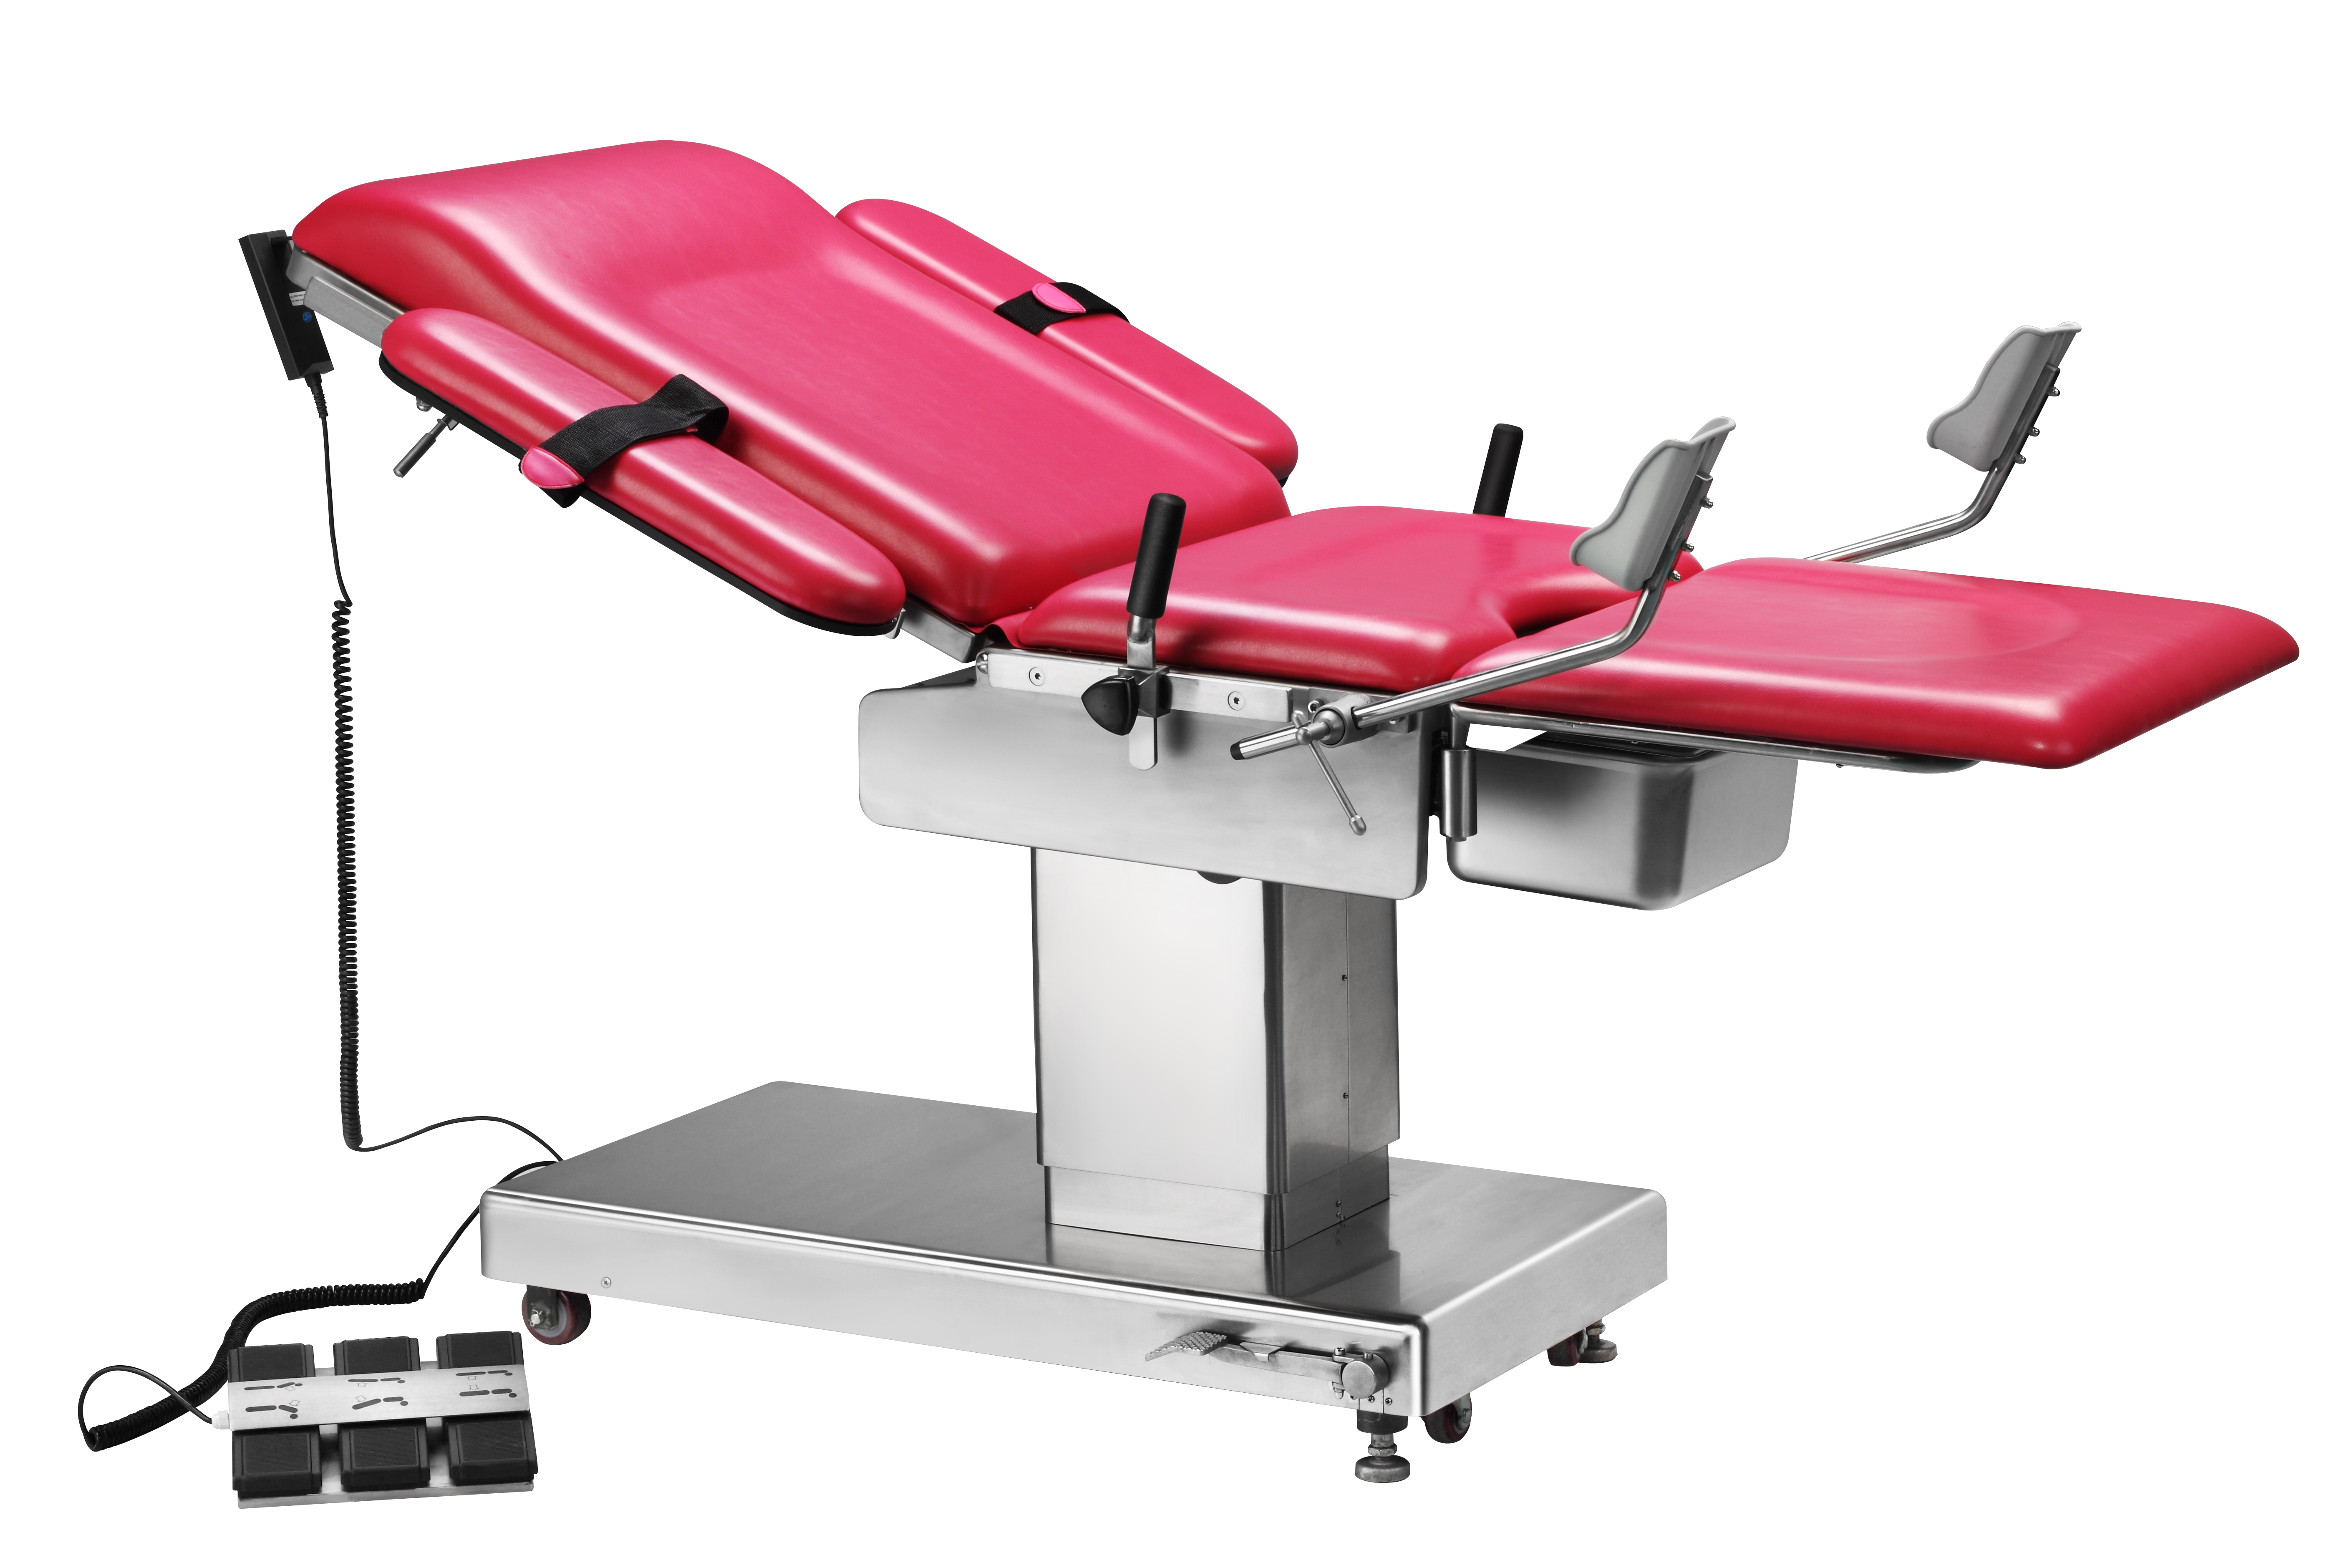 Electric gynecology table (bw-50)